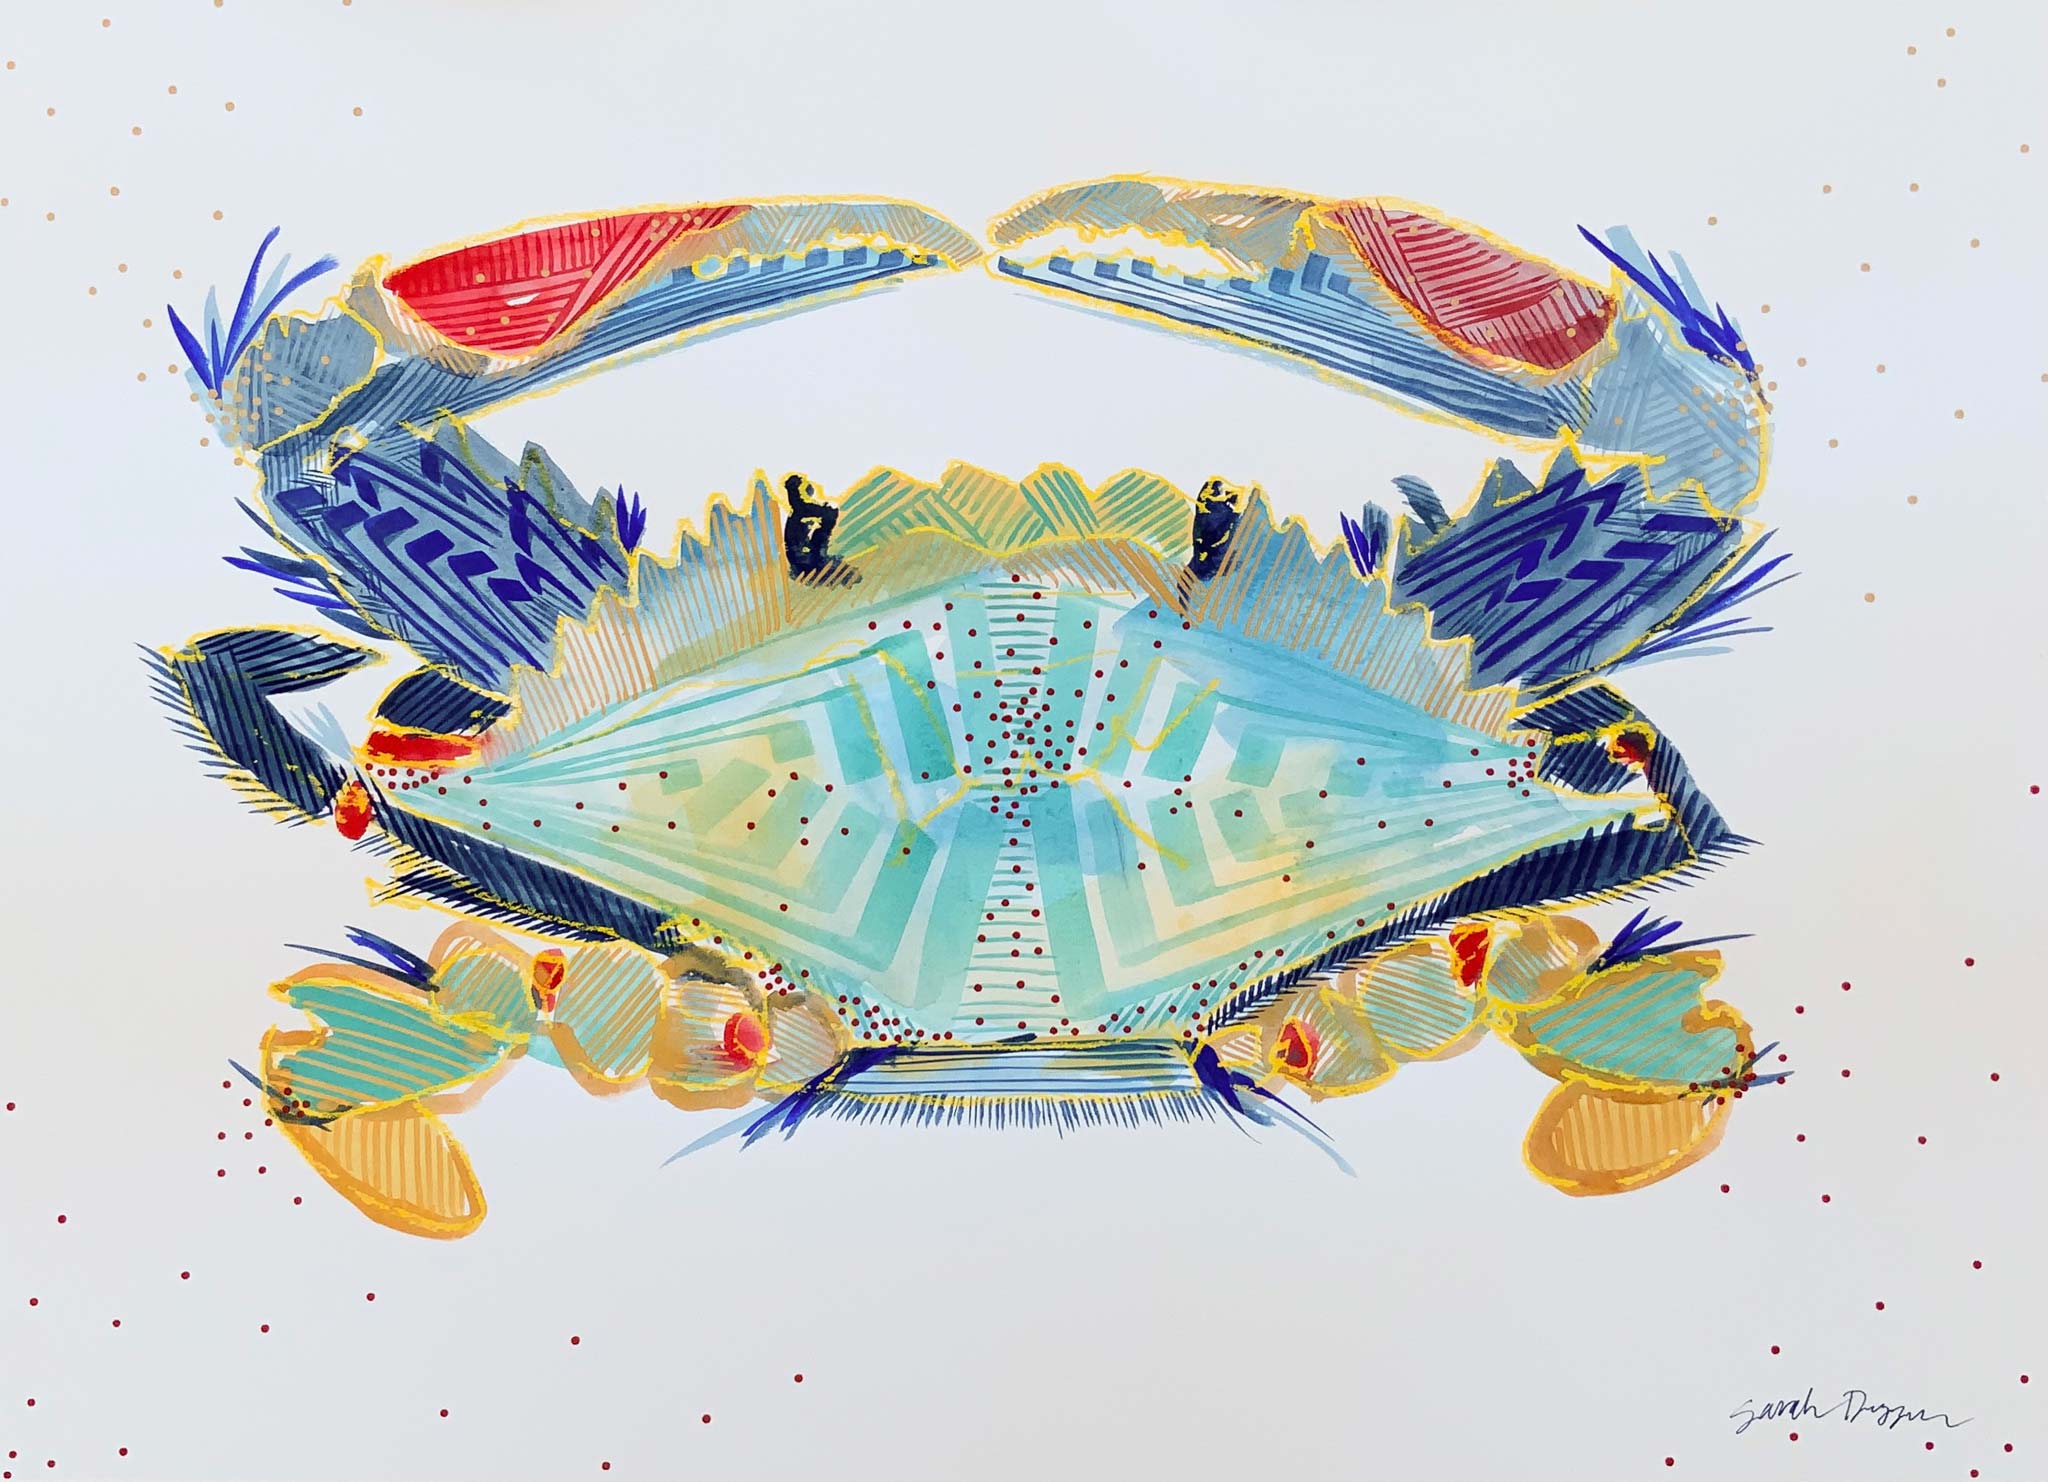 gouache, singular subject crab in aquas, reds, blues, gold, white ground, bold lines, layered print and pattern, graphic style